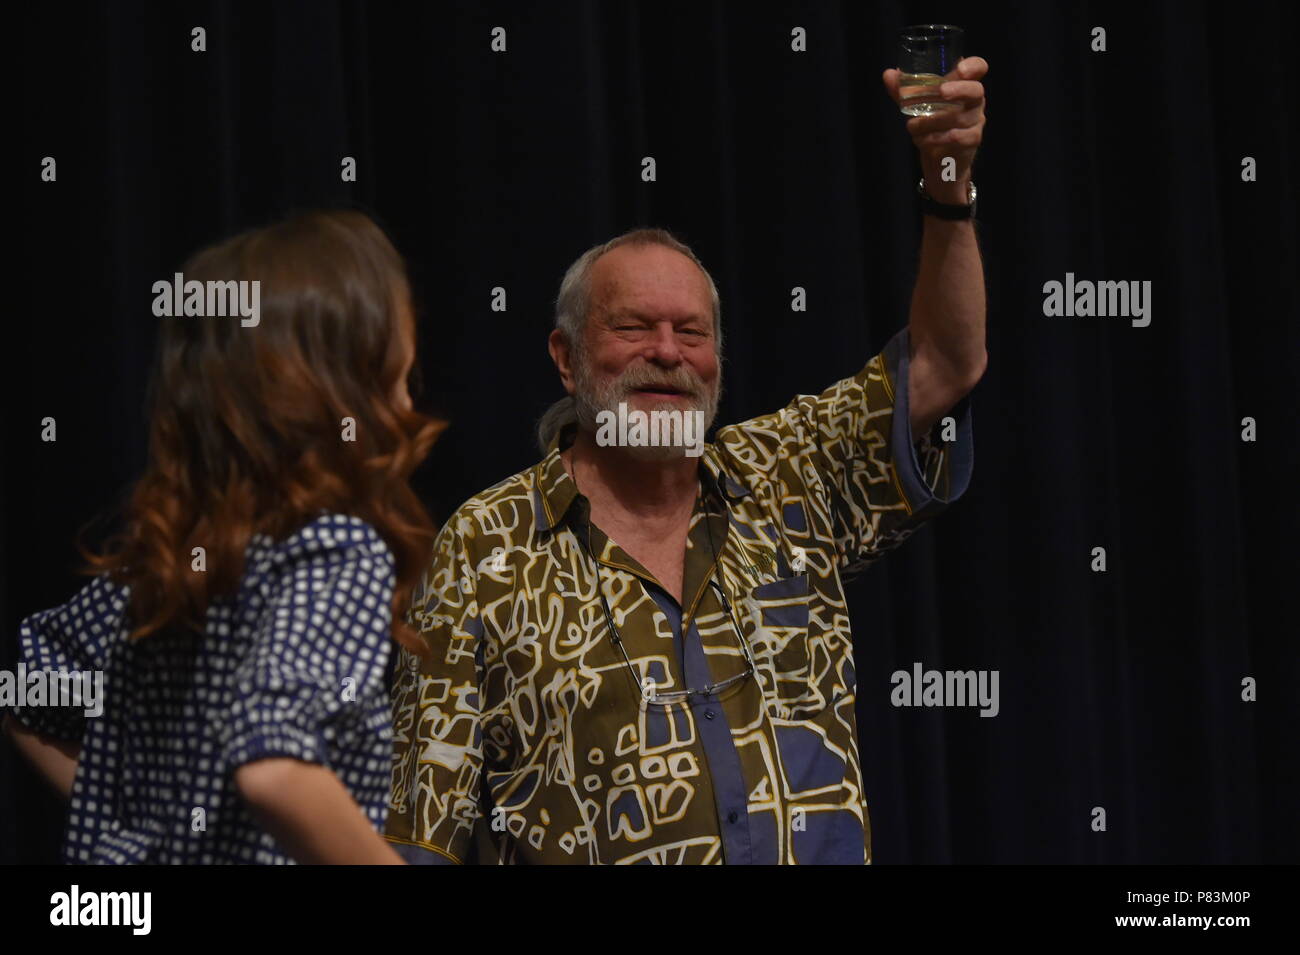 Karlovy Vary, Czech Republic. 04th July, 2018. Film director Terry Gilliam and actress Joana Ribeiro (left) presented their film 'The Man Who Killed Don Quixote' during the 53rd International Film Festival in Karlovy Vary (KVIFF), Czech Republic, on July 4, 2018. Credit: Slavomir Kubes/CTK Photo/Alamy Live News Stock Photo